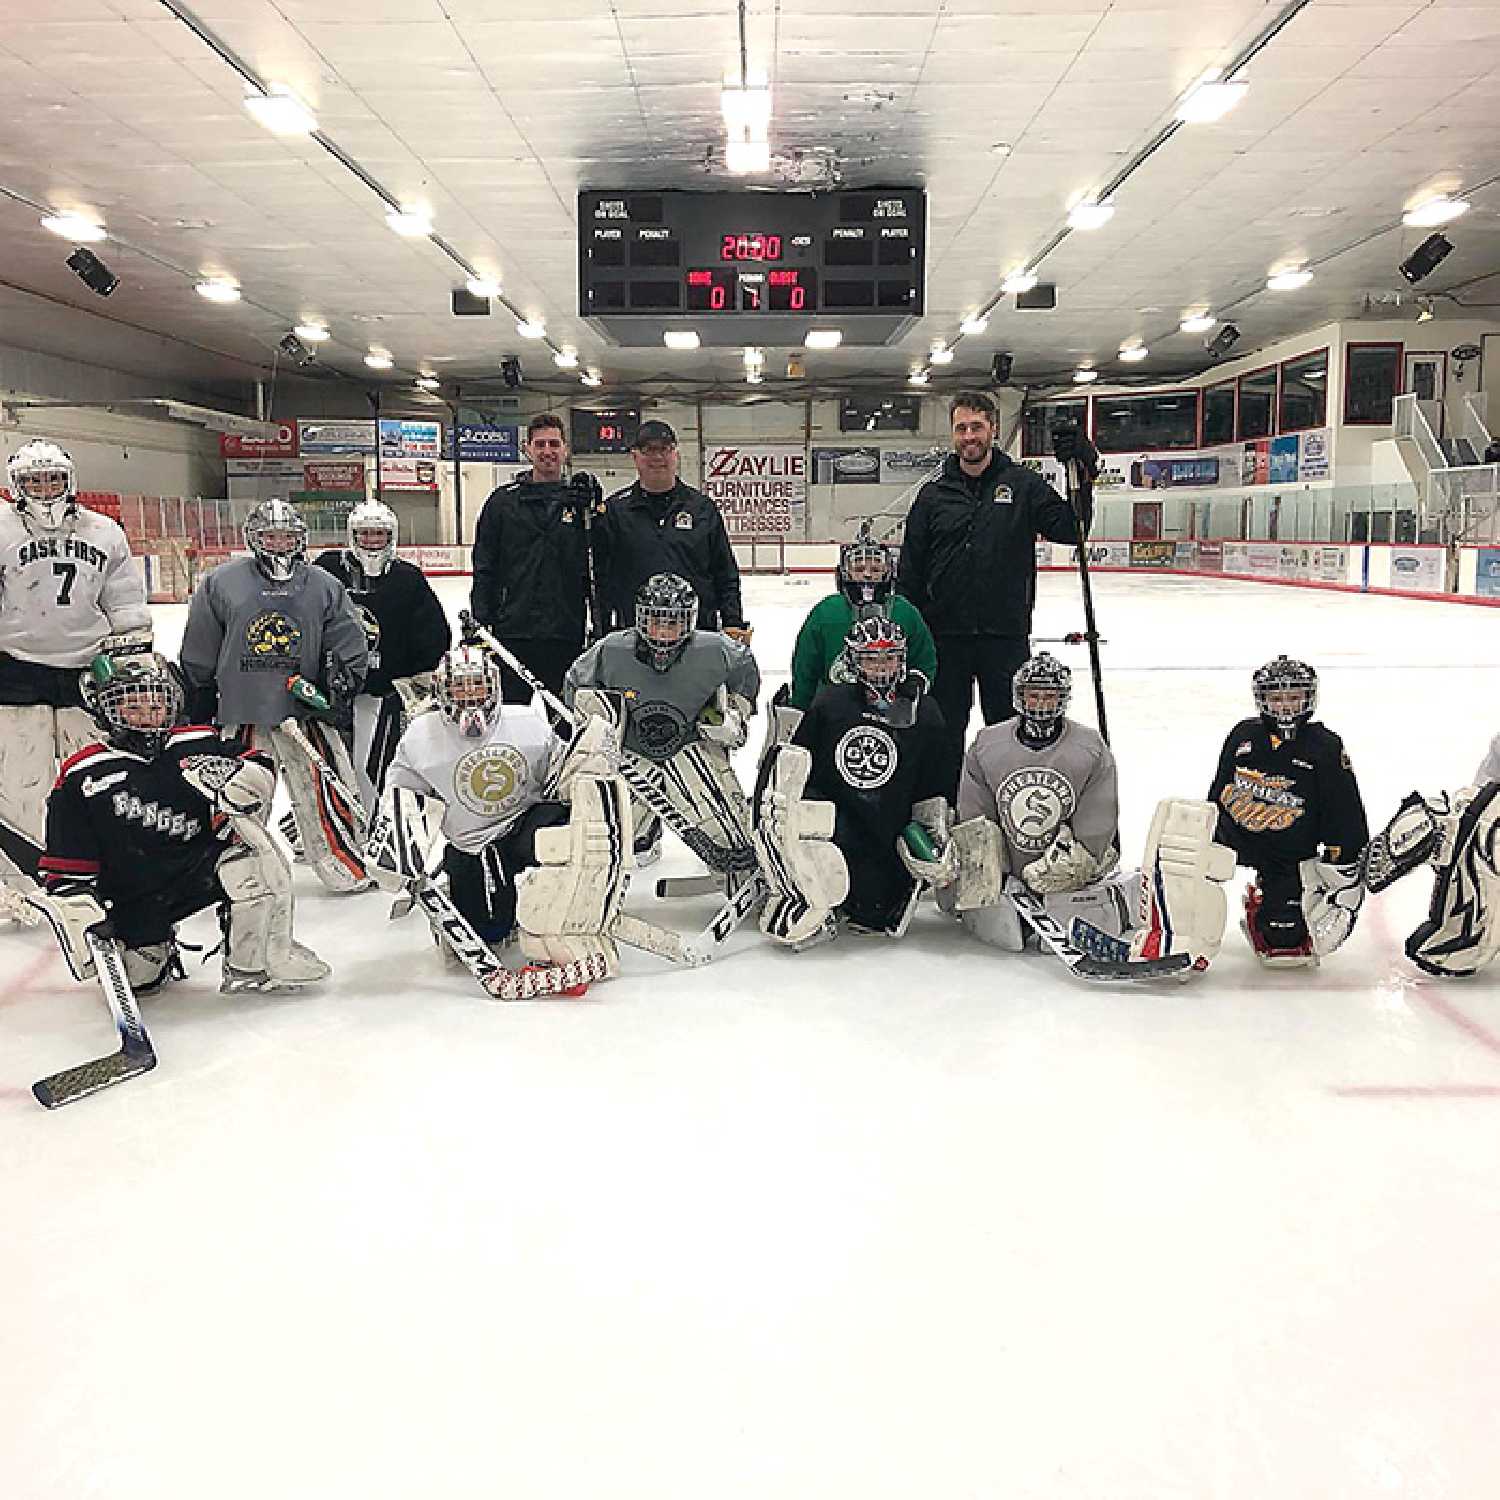 Above, is one of the photo’s submitted for Moosomin’s nomination page for Kraft Hockeyville 2023. The photo captures a goalie clinic that was hosted by Moosomin’s Minor Hockey Board. The three goalie coaches at the top are, Logan Thompson who plays for NHL            Las Vegas Golden Knights, Brian Elder and Tyler Plante. 